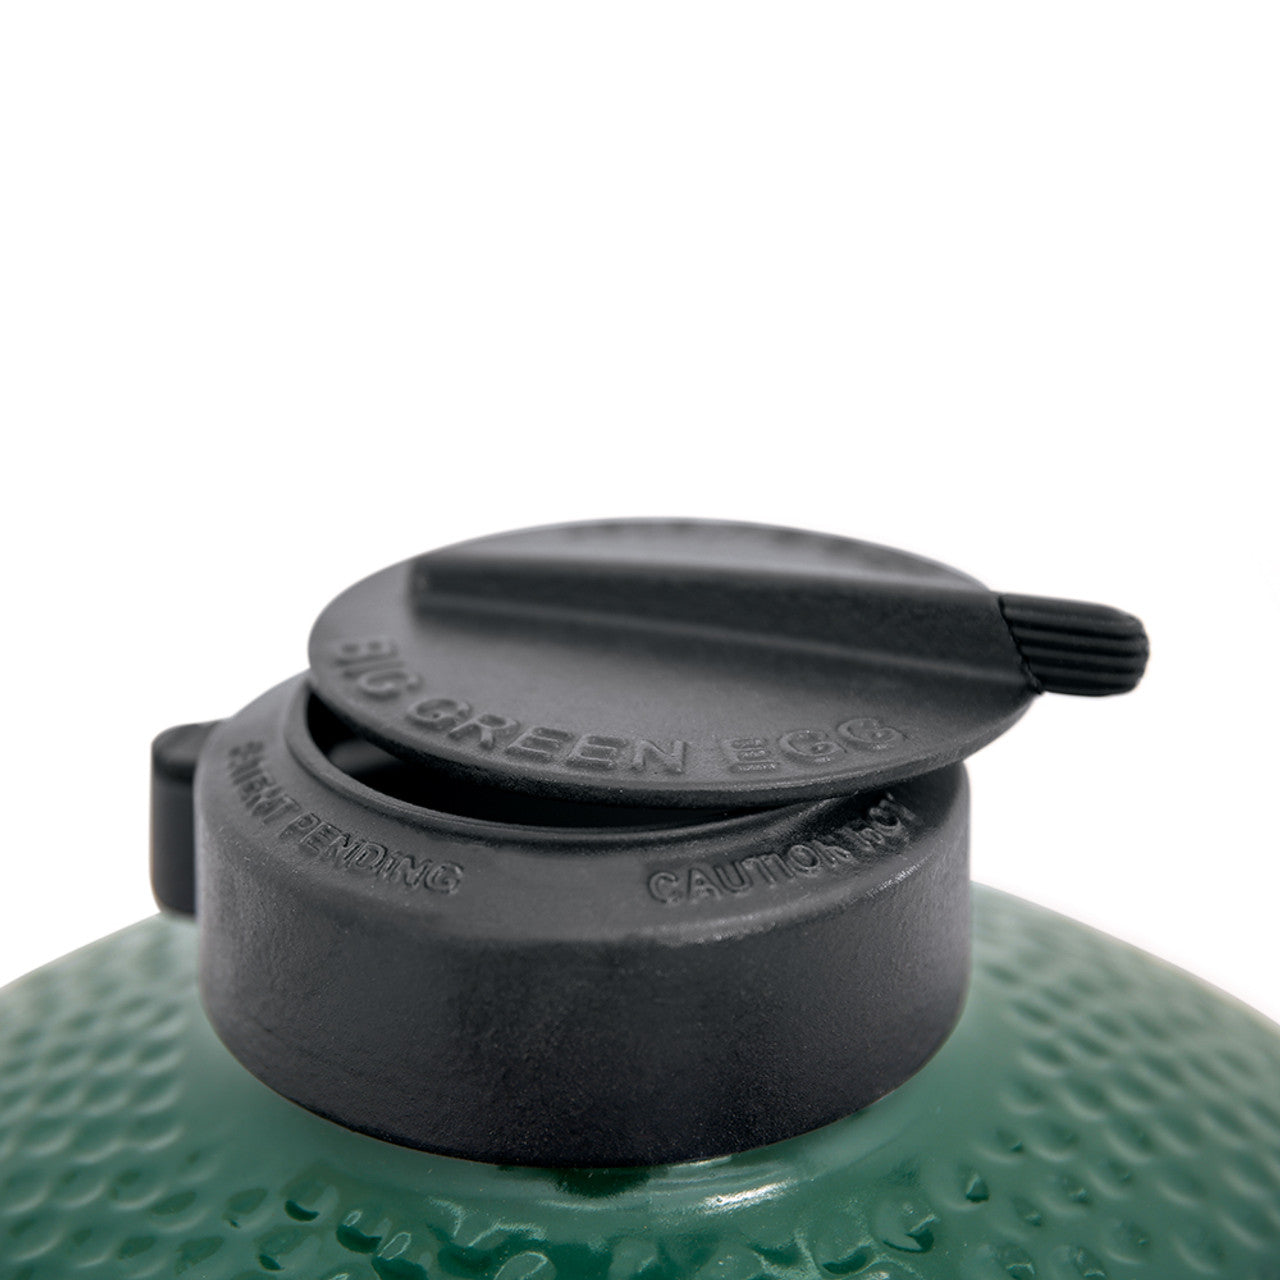 Big Green Egg XLarge intEGGrated Nest and Handler with Mates Package